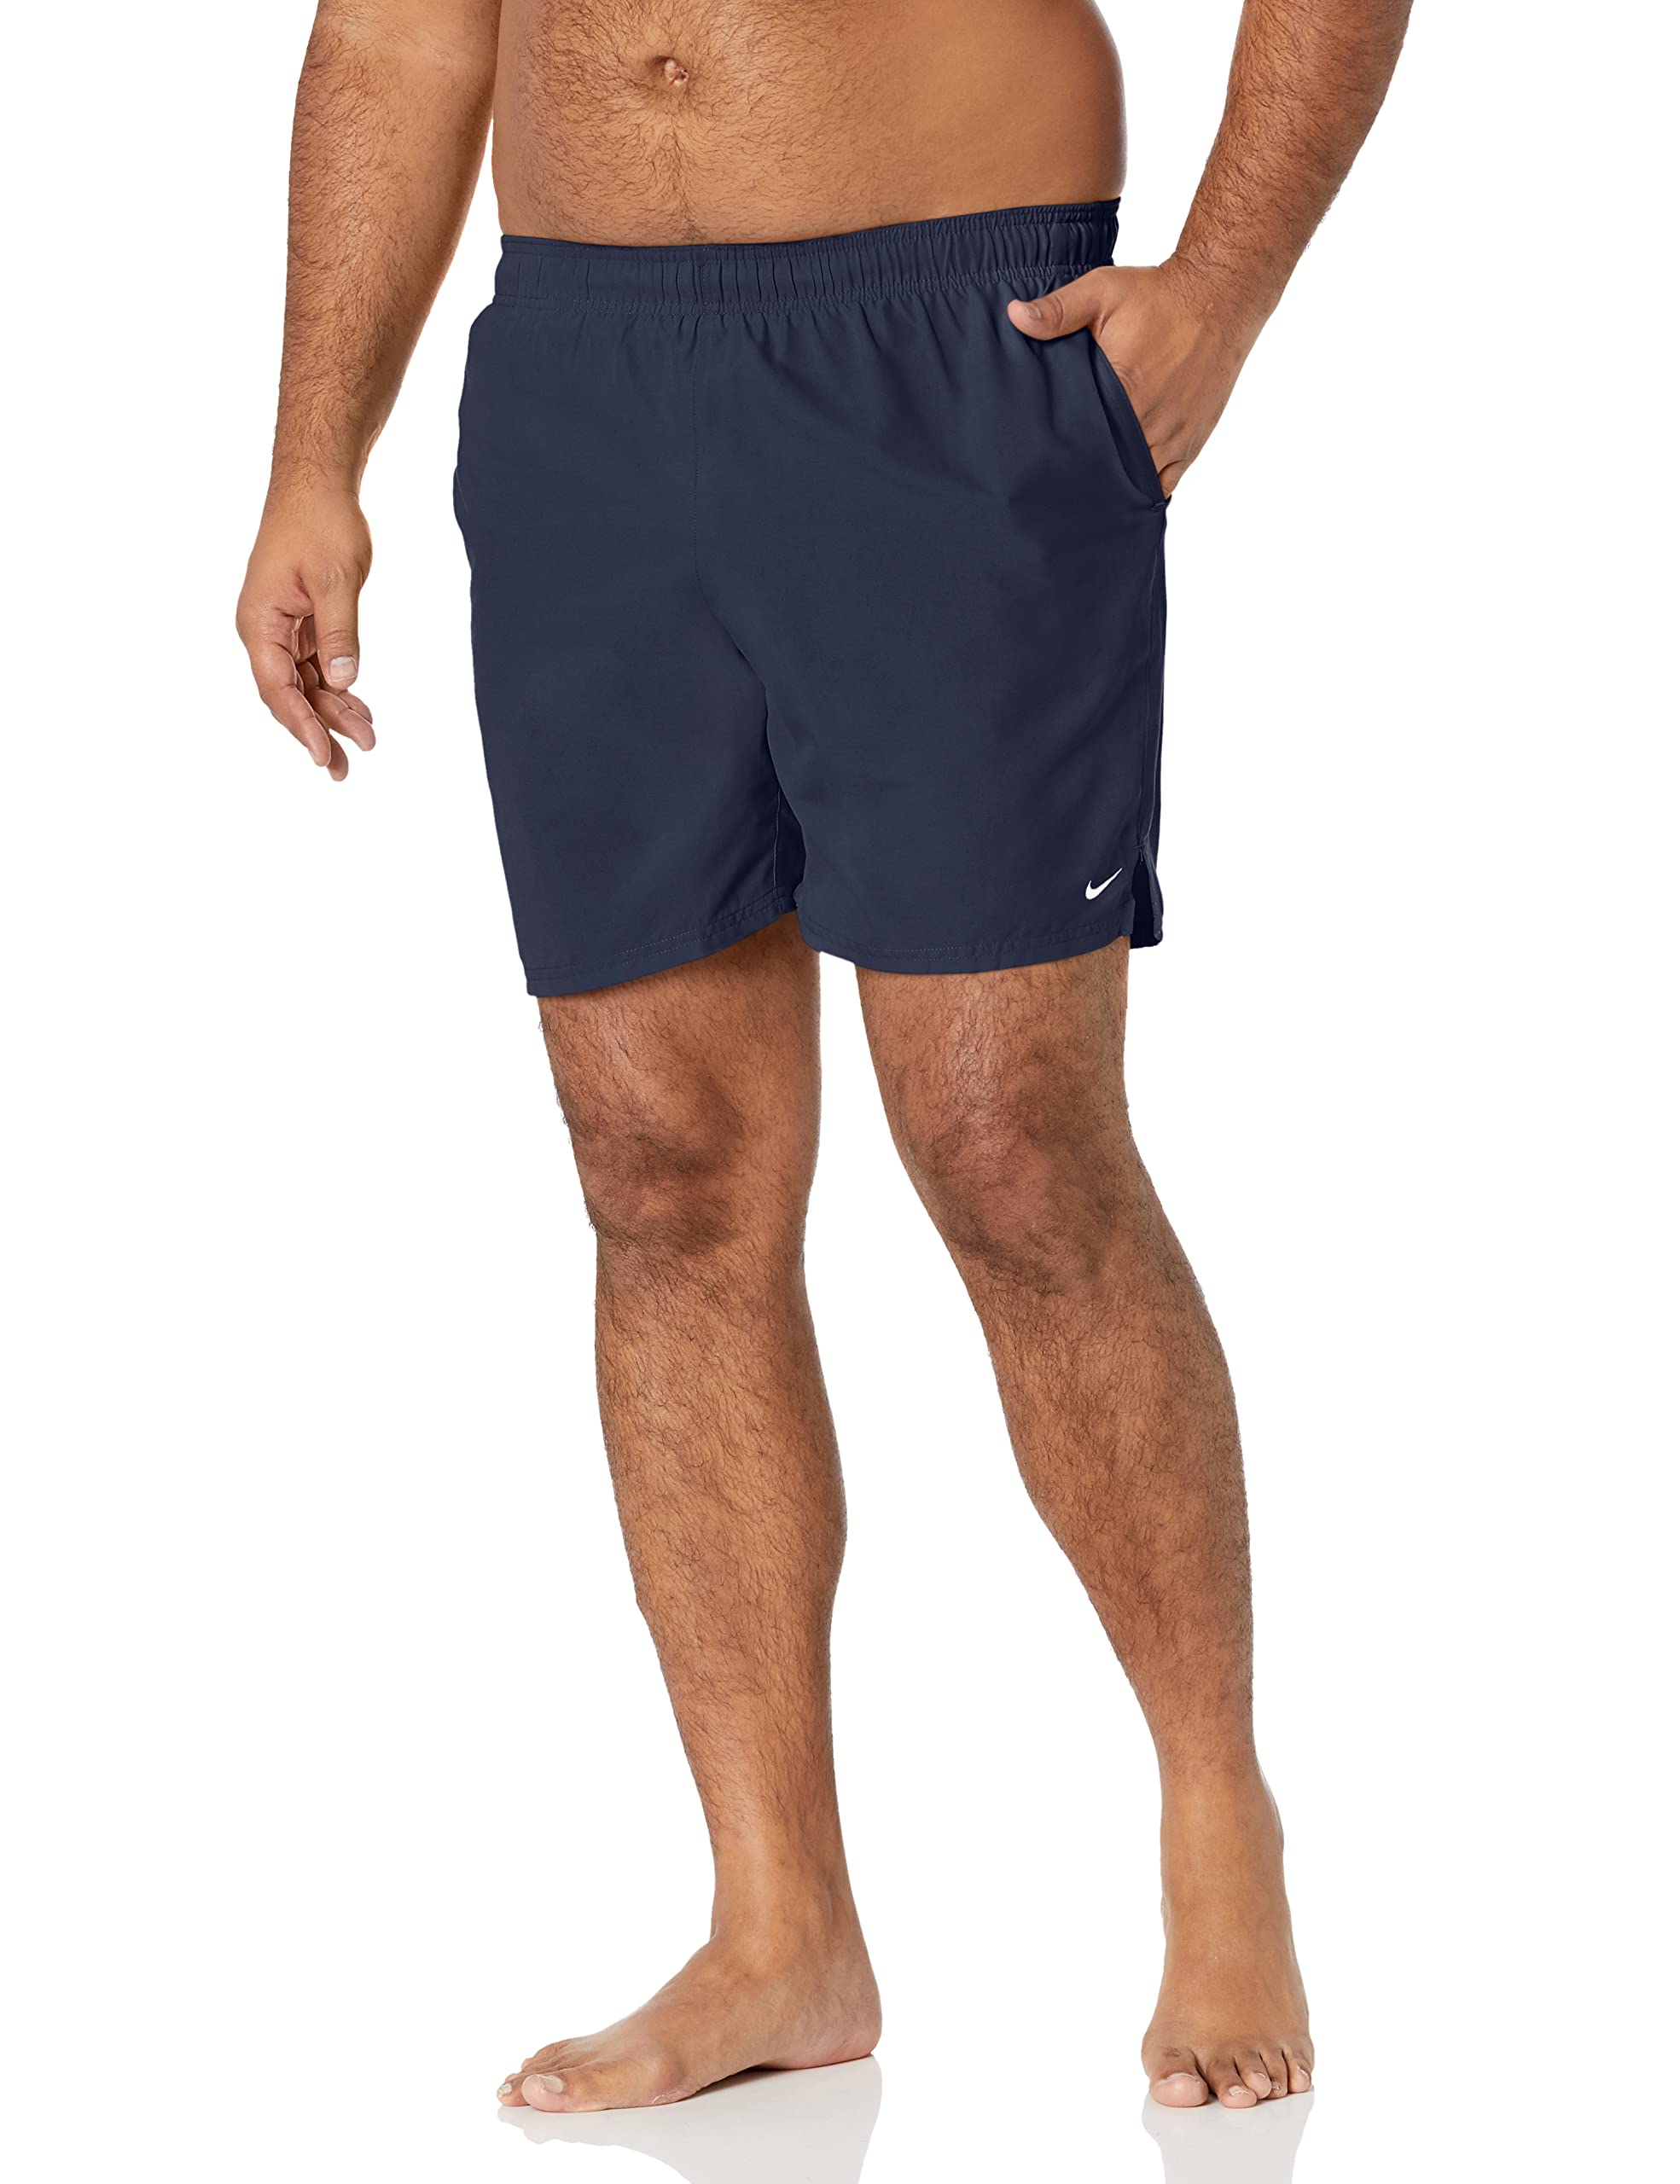 Nike Mens Solid Lap 7 Inch Volley Short Swim Trunk - Midnight Navy White - L